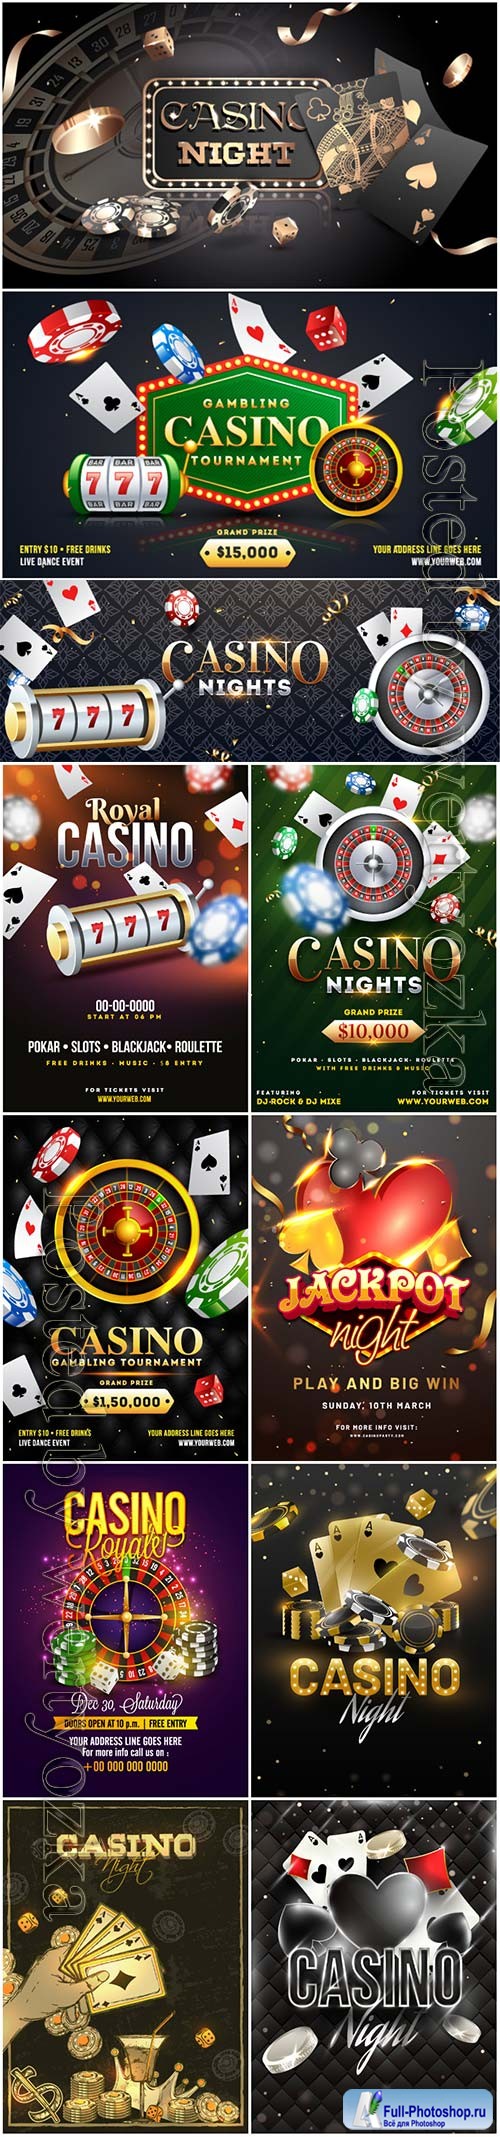 Advertising poster design, Casino Night text with casino chips, coins and playing cards illustration